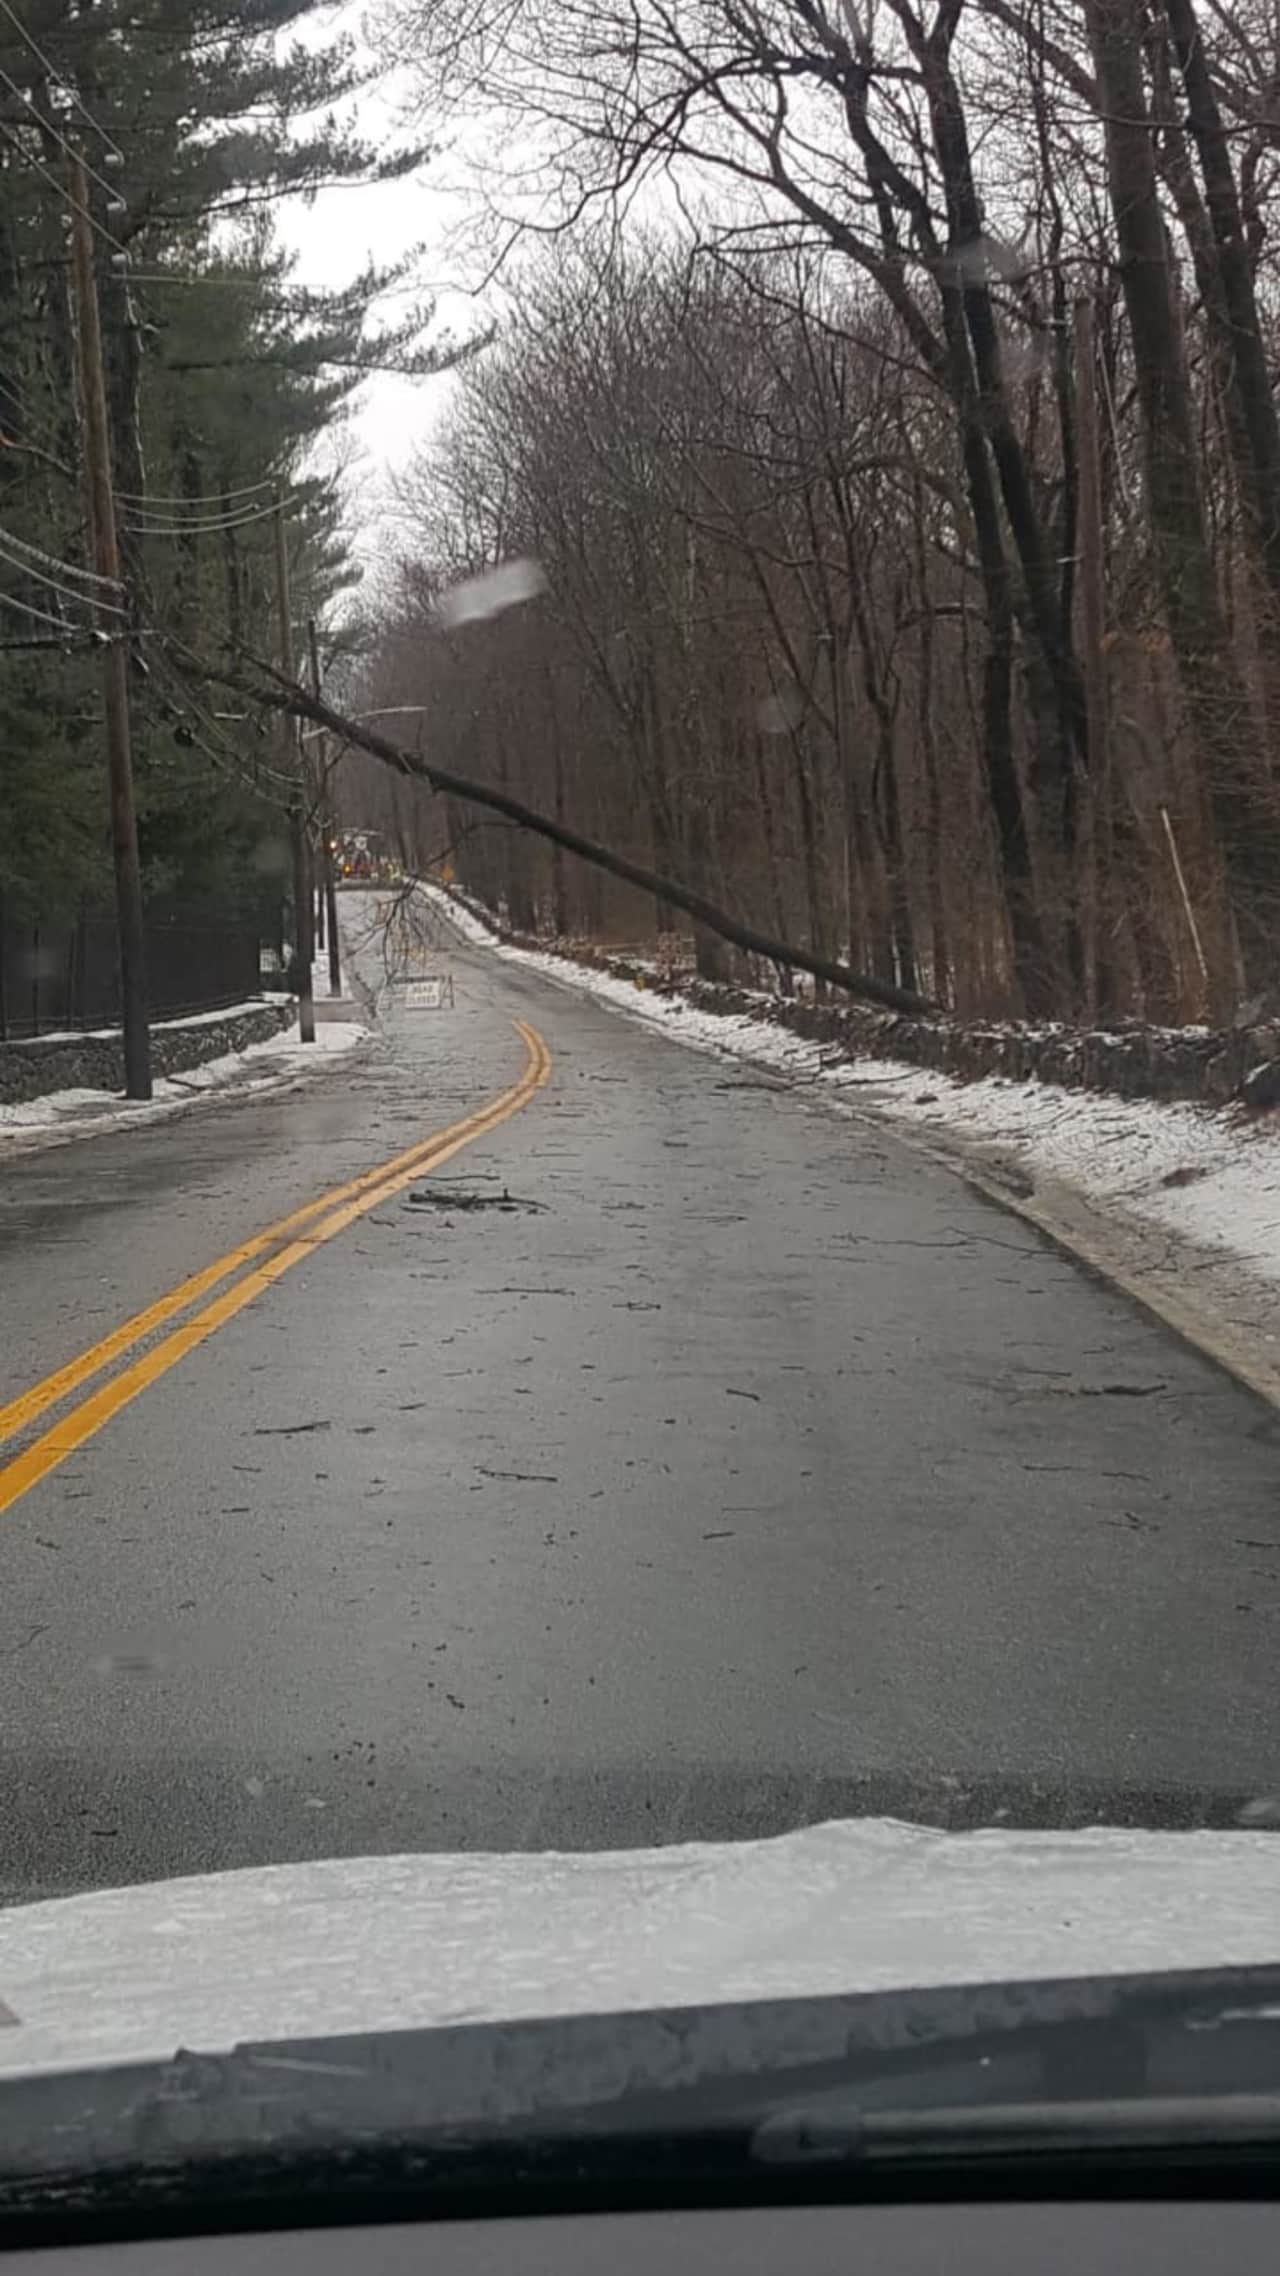 Hundreds of trees and power lines have been felled during the Nor'easter in the Hudson Valley.